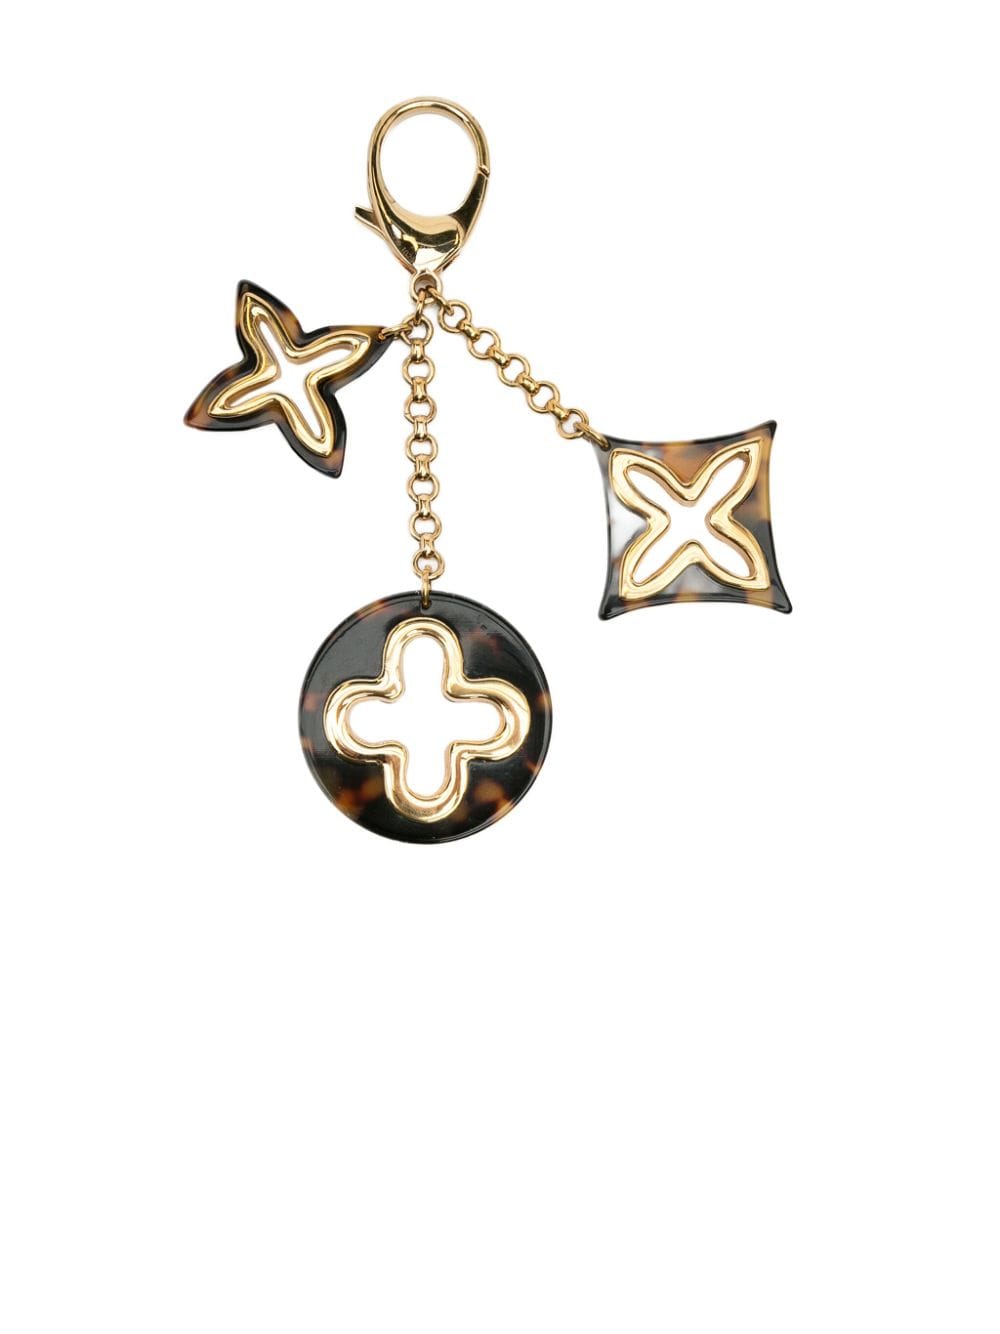 Louis Vuitton Pre-Owned 2009 Insolence Bag Charm key chain - Gold von Louis Vuitton Pre-Owned